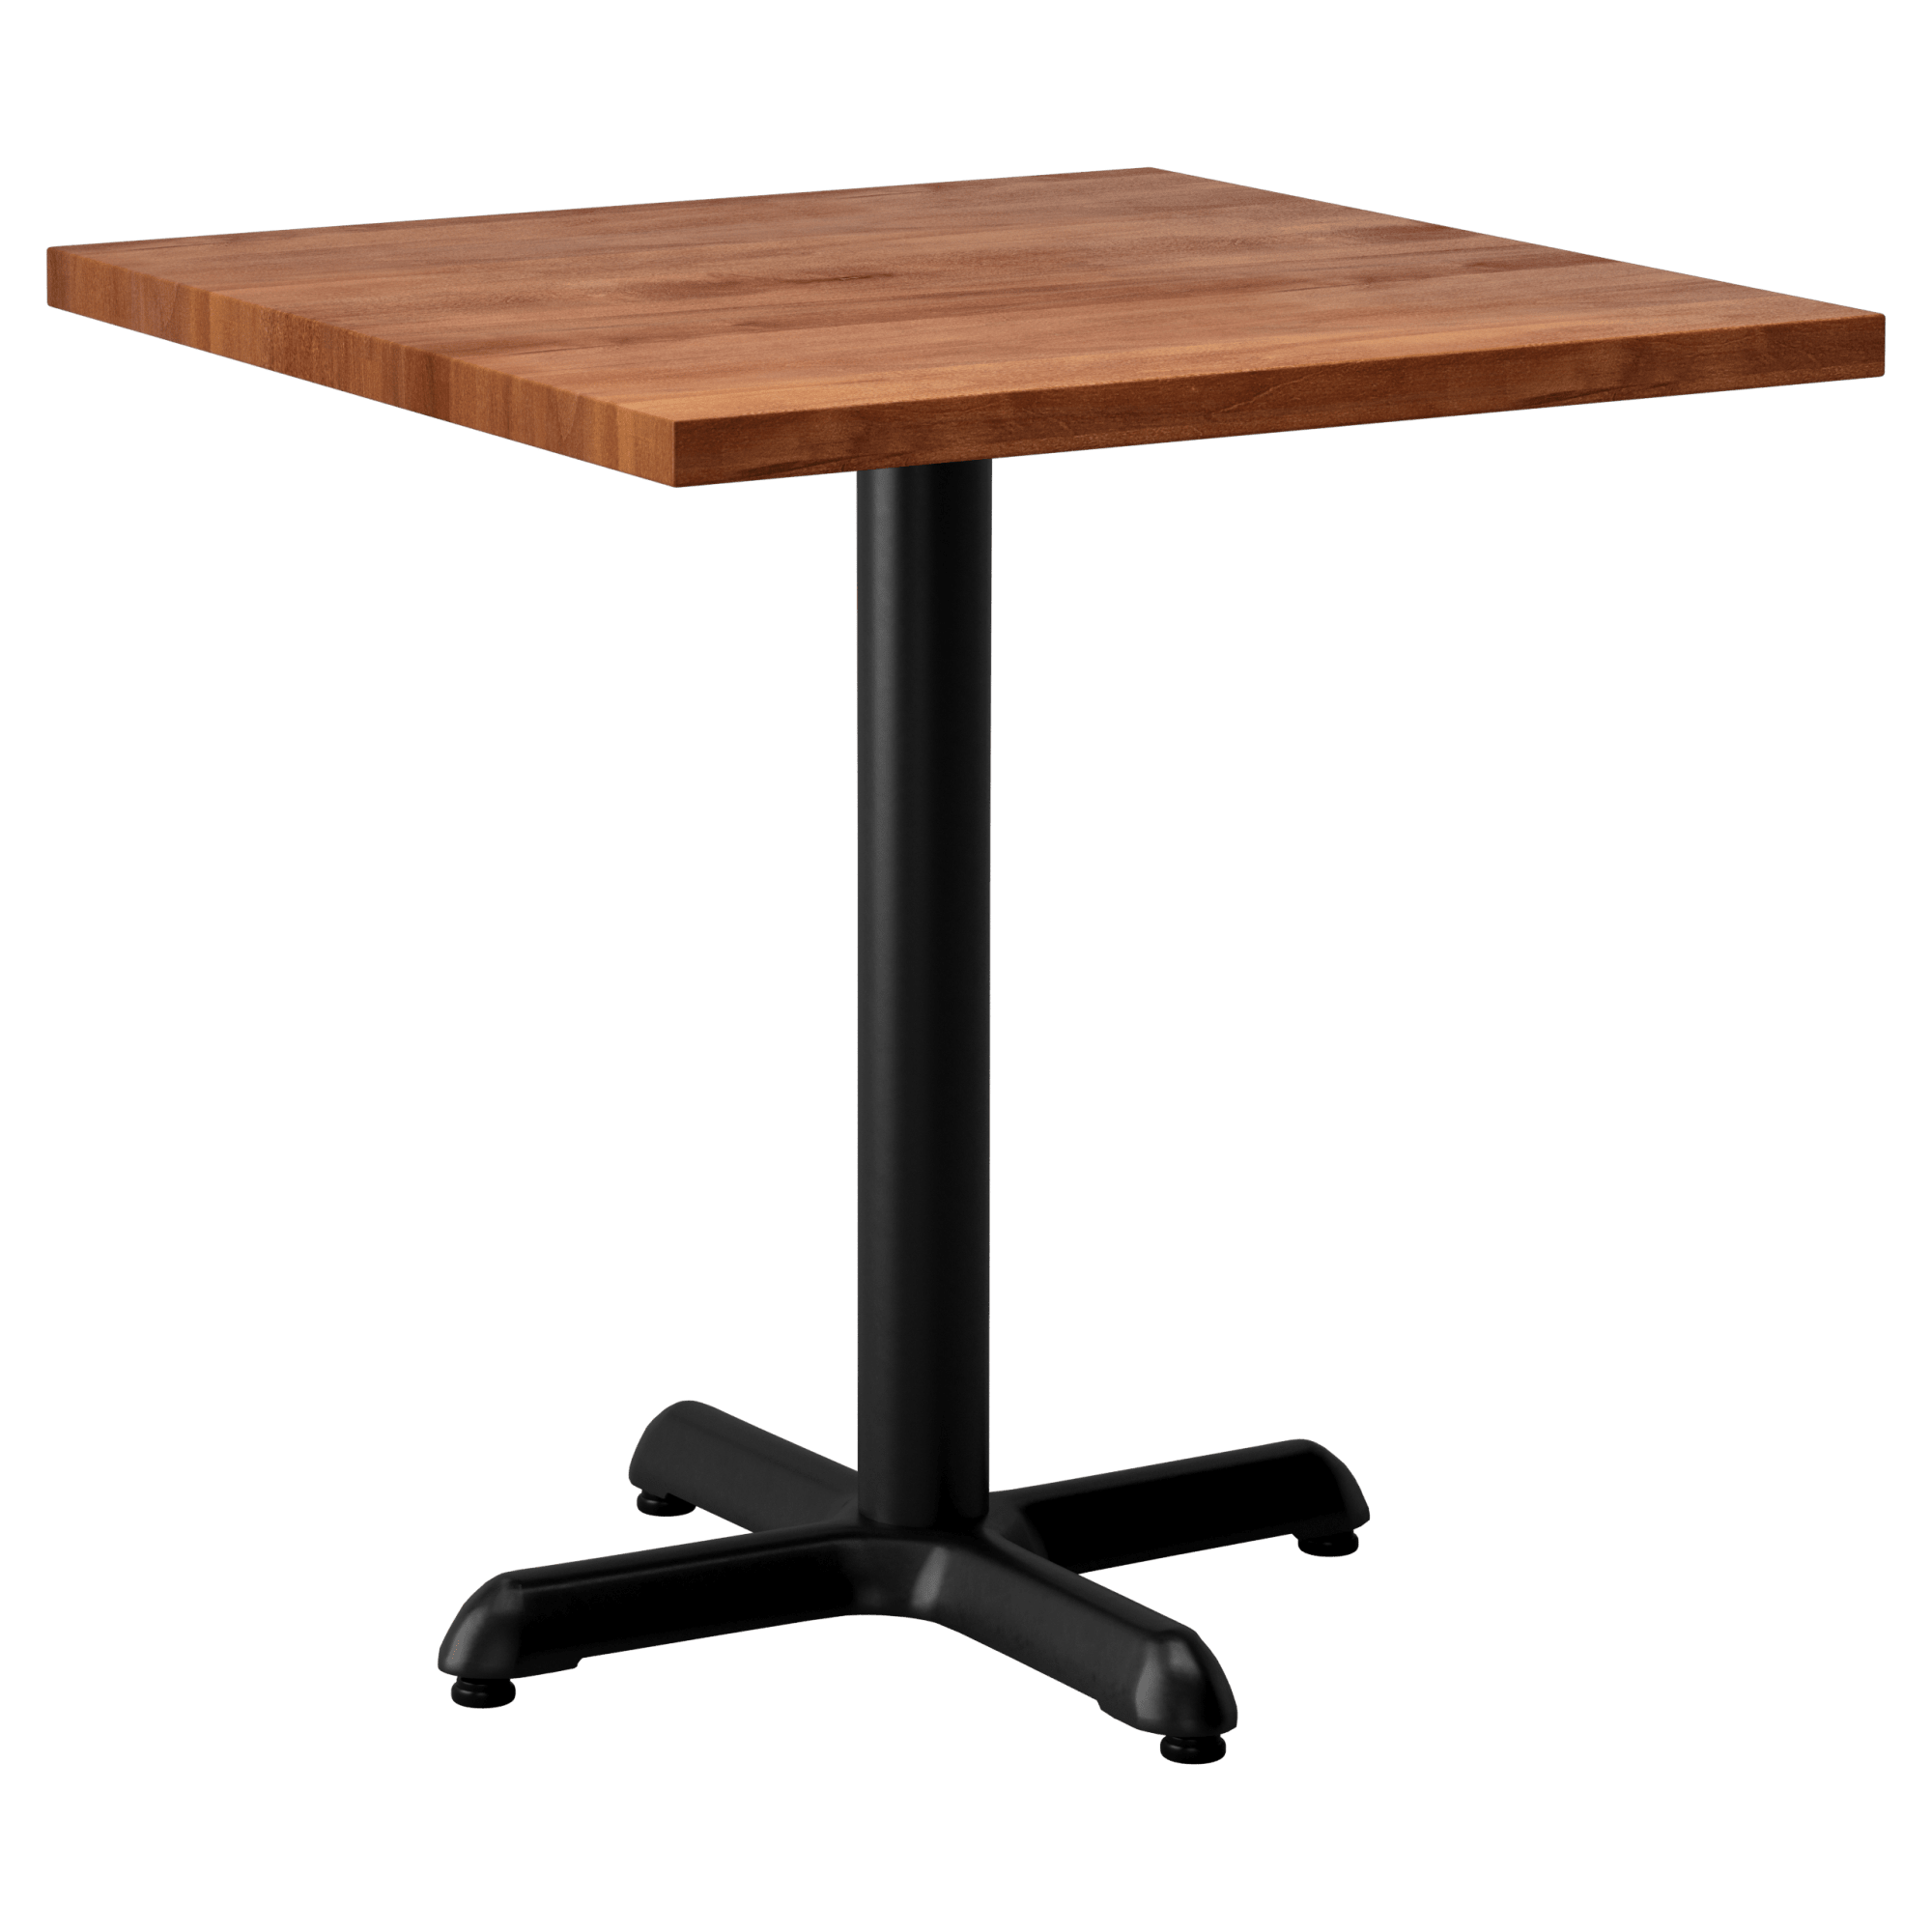 Premium Solid Wood Plank Restaurant Table  with Premium Solid Wood Plank Restaurant Table 